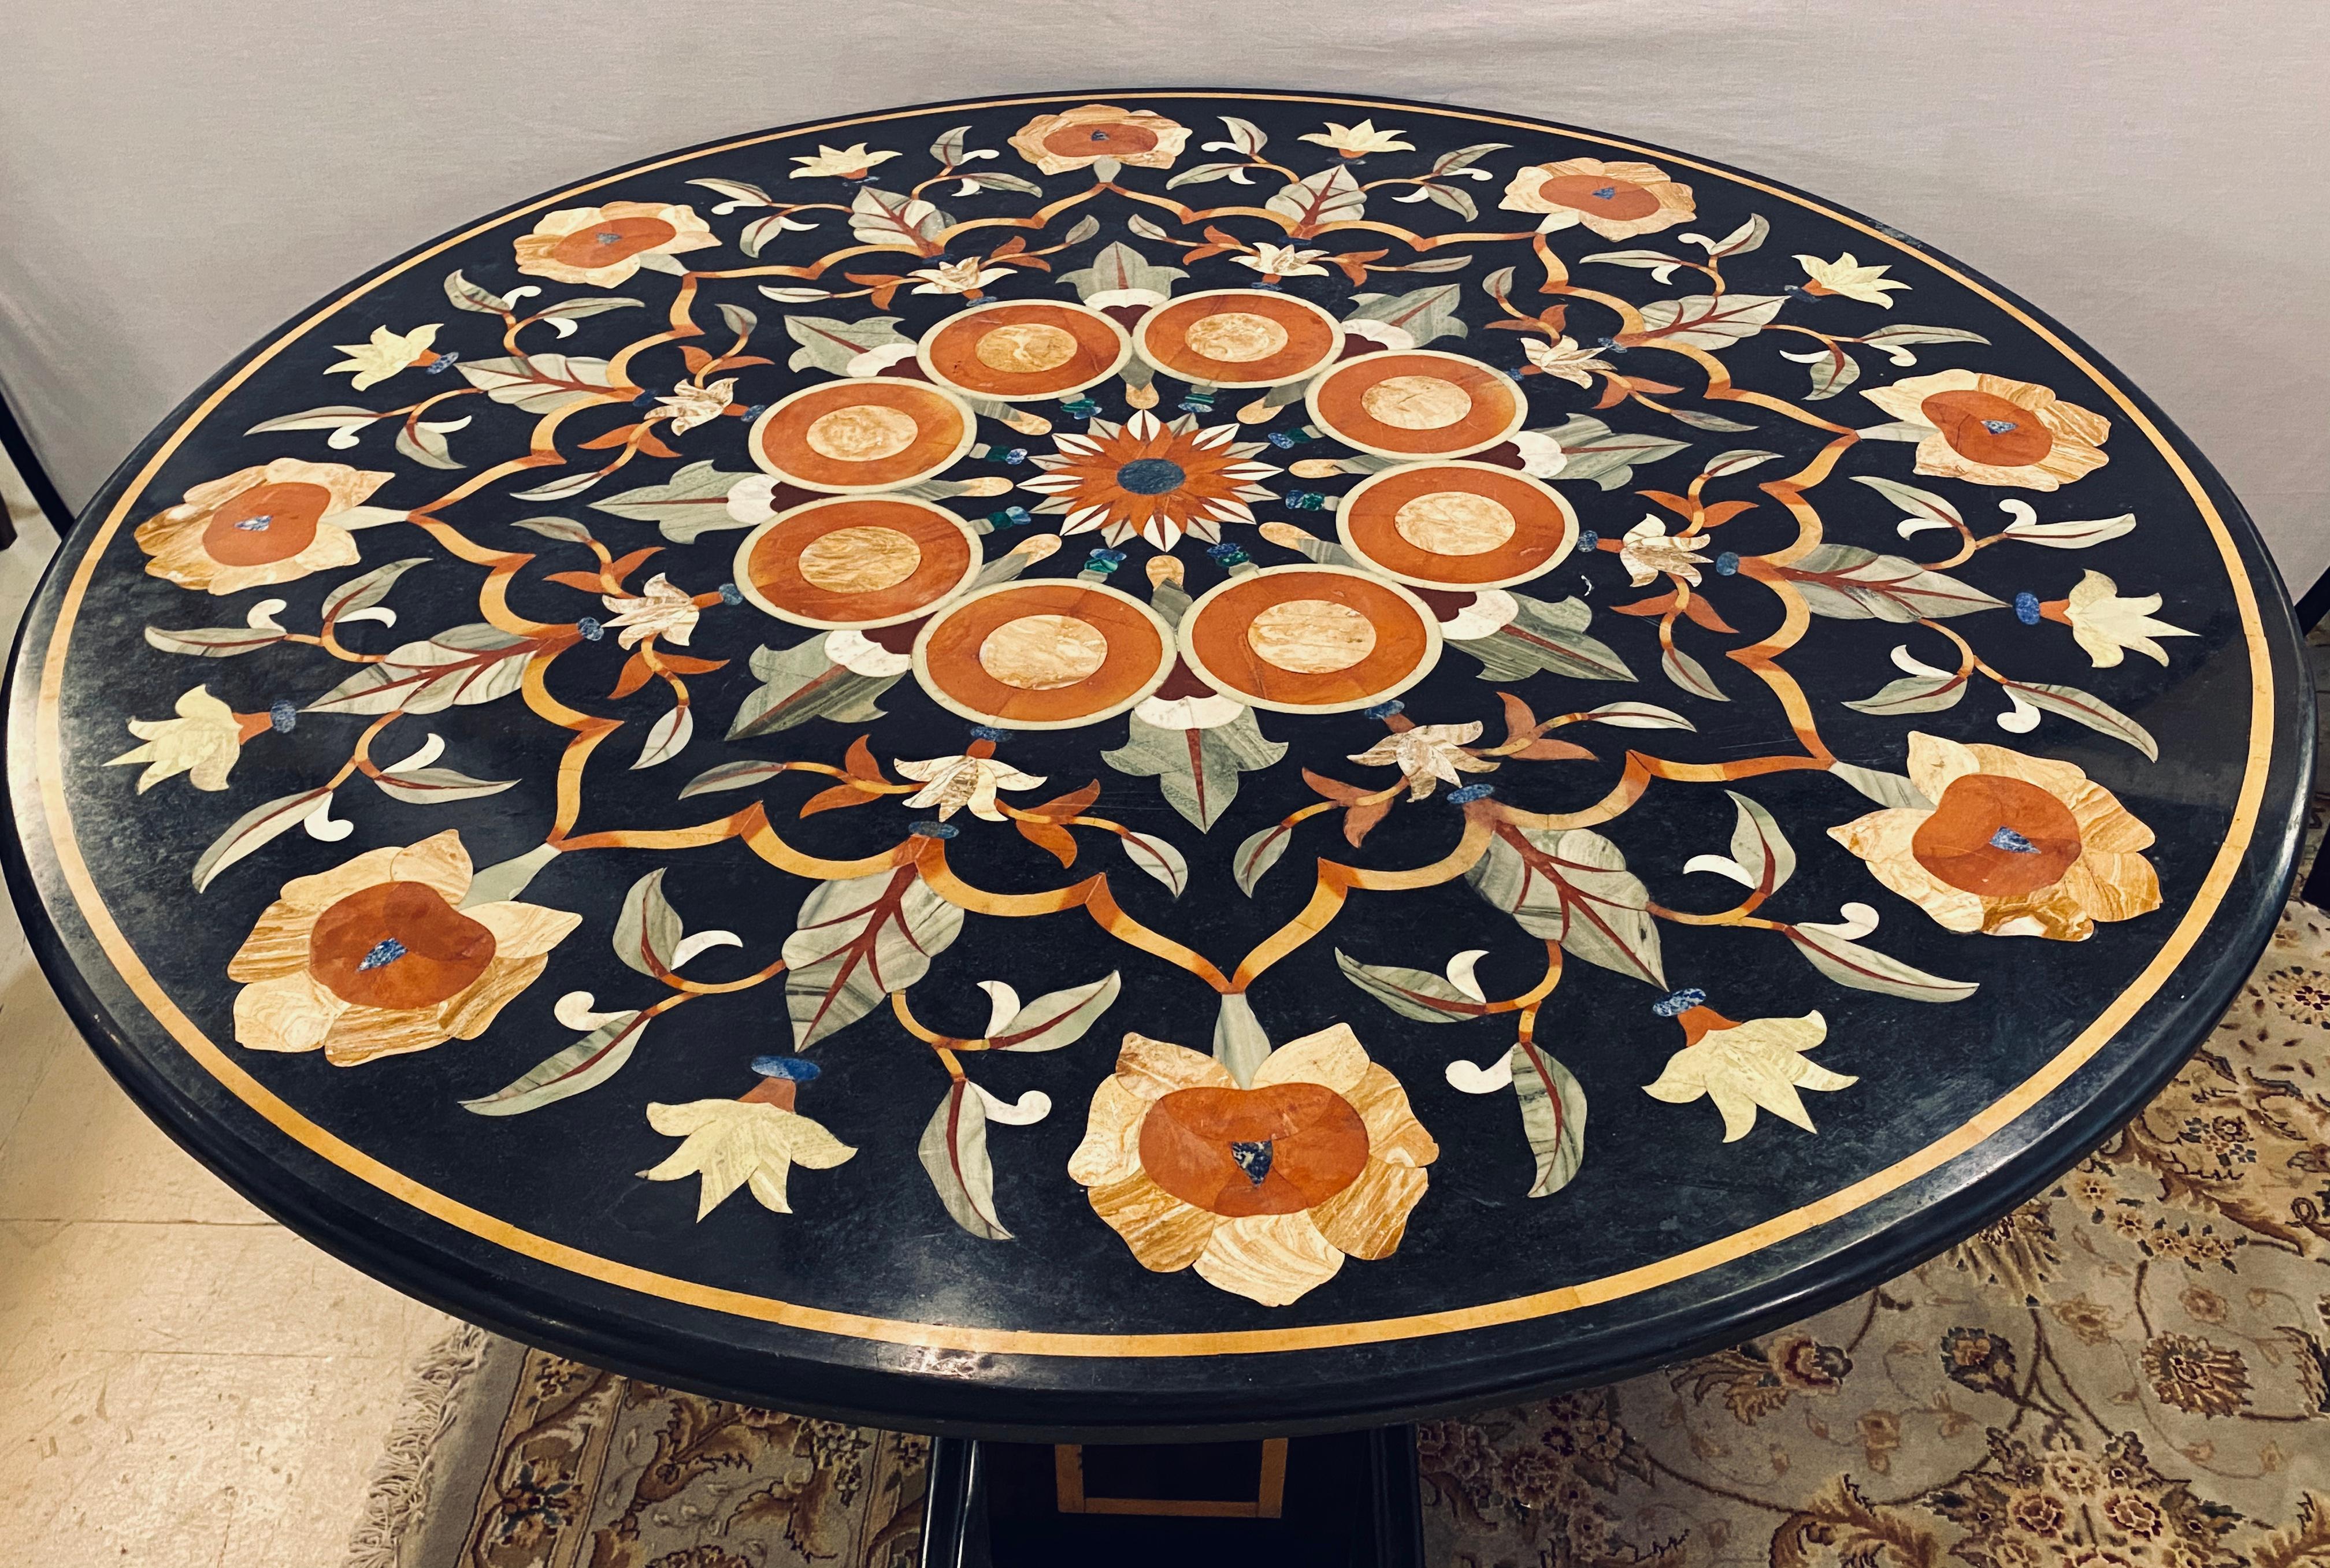 Pietra dura marble top dining or center table with marble ebony inlaid pedestal base. The finely cut and inlaid marble table top is 1.5 inches thick with rounded edges and is 48 inches in diameter. This stunning center or dining table is one of two